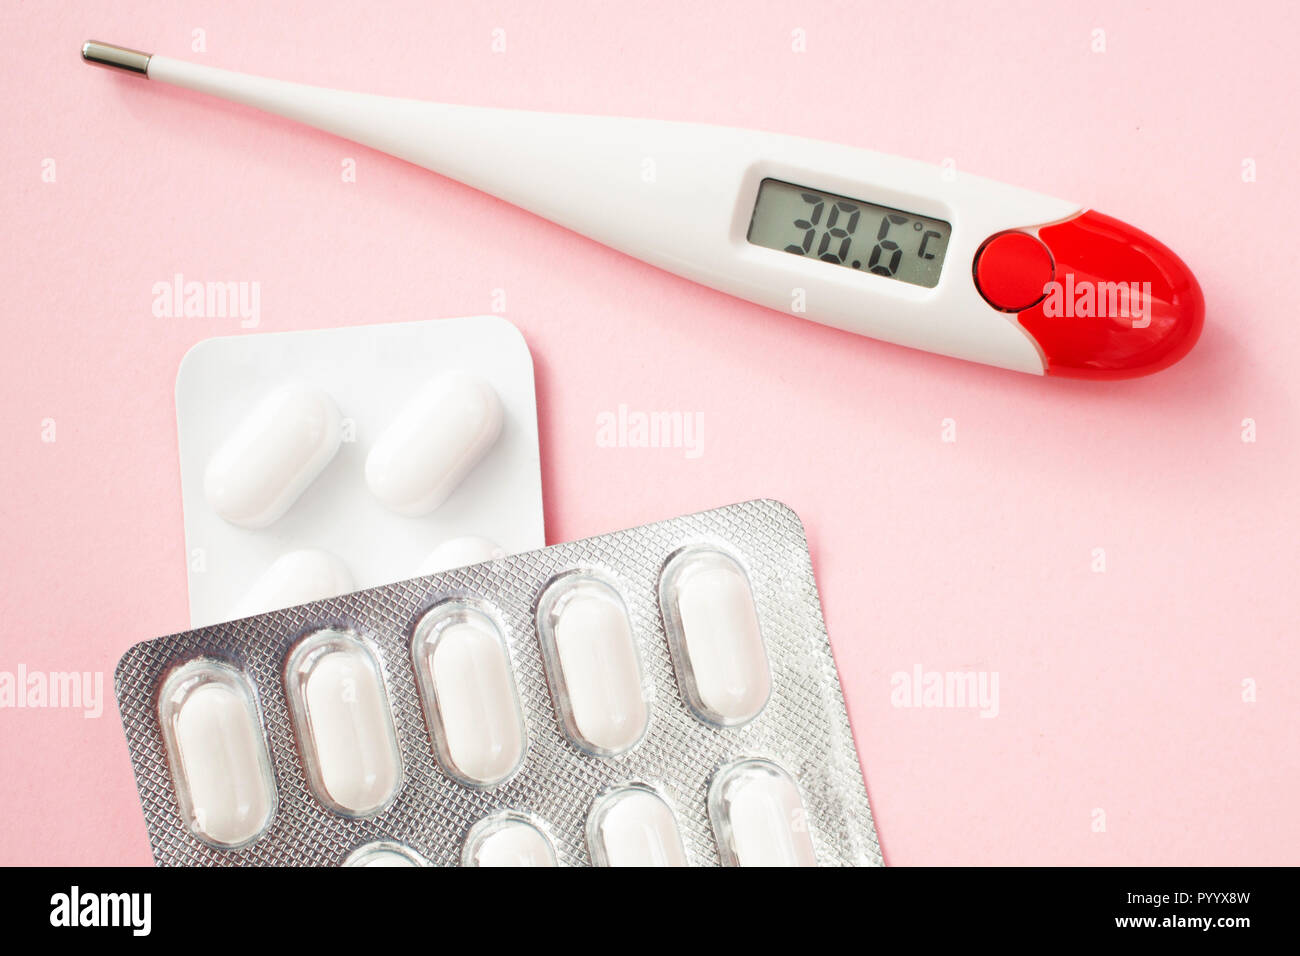 https://c8.alamy.com/comp/PYYX8W/white-digital-clinical-thermometer-shows-fever-heat-temperature-and-pills-on-pink-background-PYYX8W.jpg